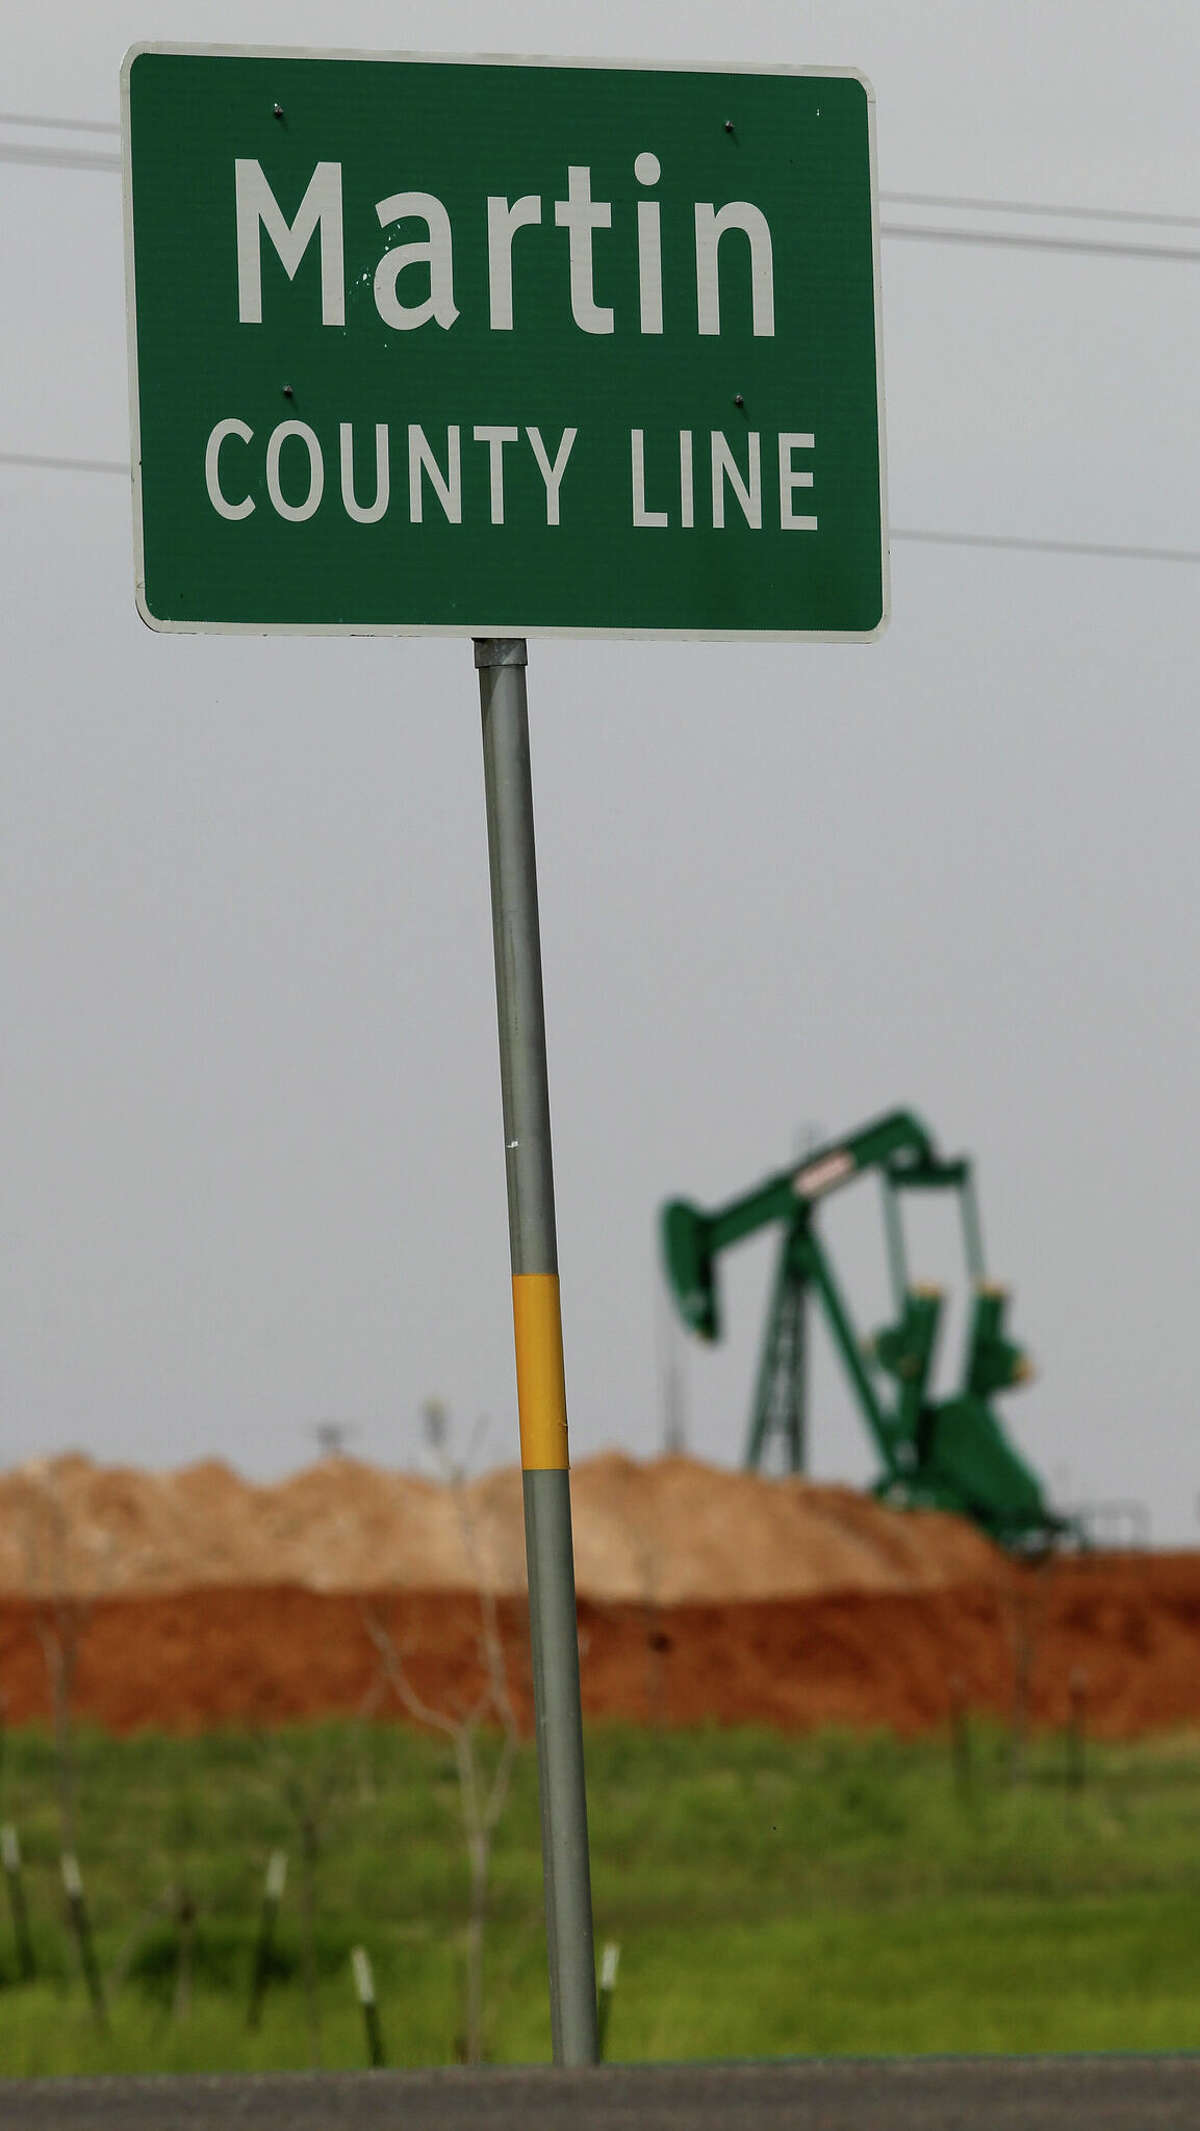 A pumpjack rocks back and forth near a sign marking the Martin County line near Stanton, April 2, 2014.